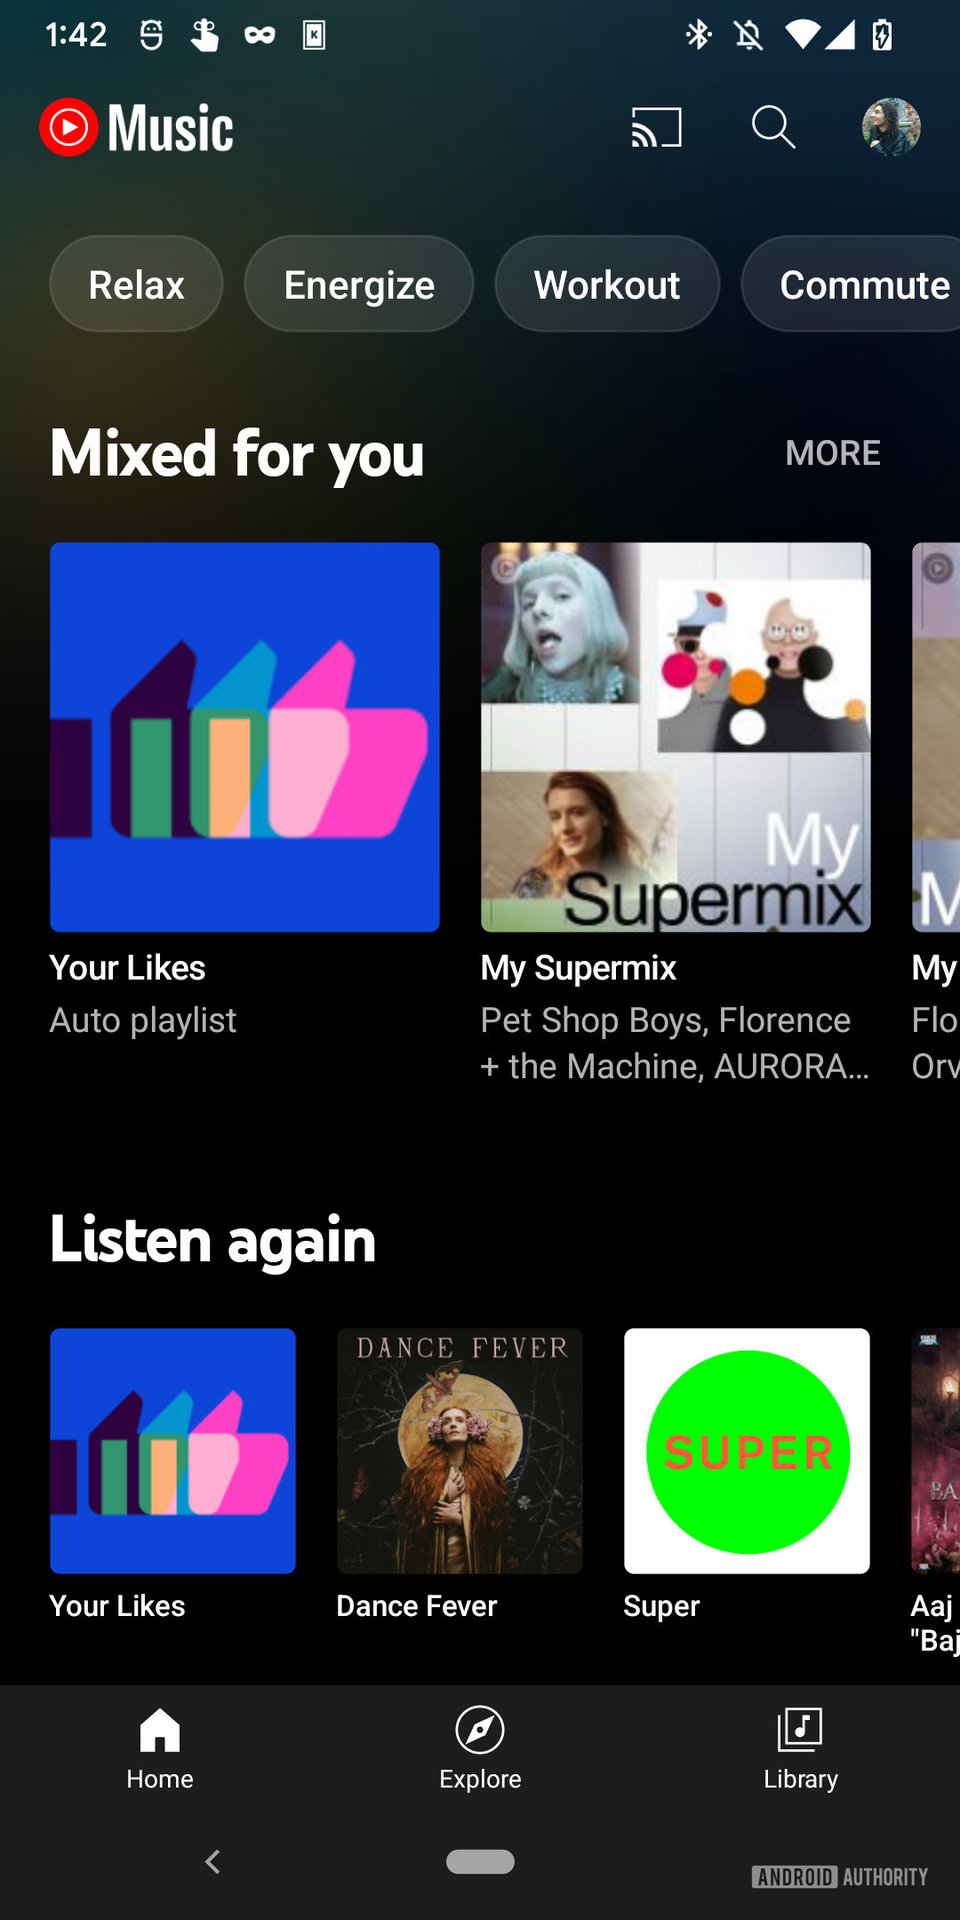 A screenshot of the YouTube Music app with a Premium subscription showing the "Home" tab with the "Mixed for you," and L"isten again" sections visible showing various artists and albums plus playlists, and across the top are buttons to access other playslists for "Relax," "Energize," "Workout," and "Commute."